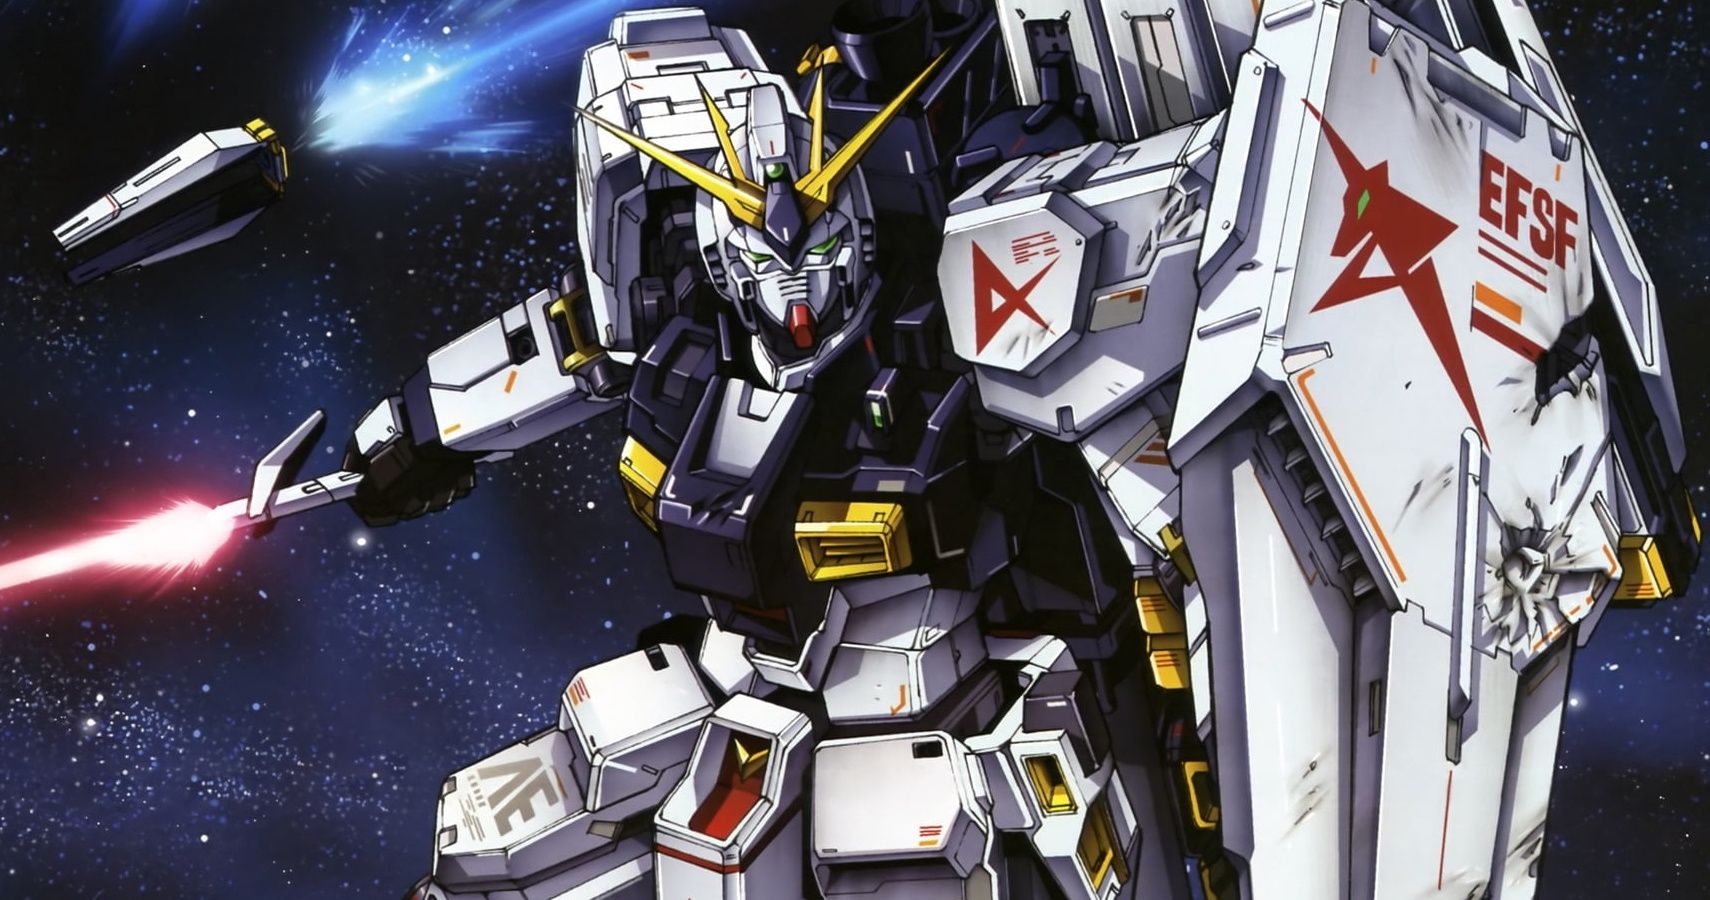 A live-action Gundam feature film is in the works, care of Netflix